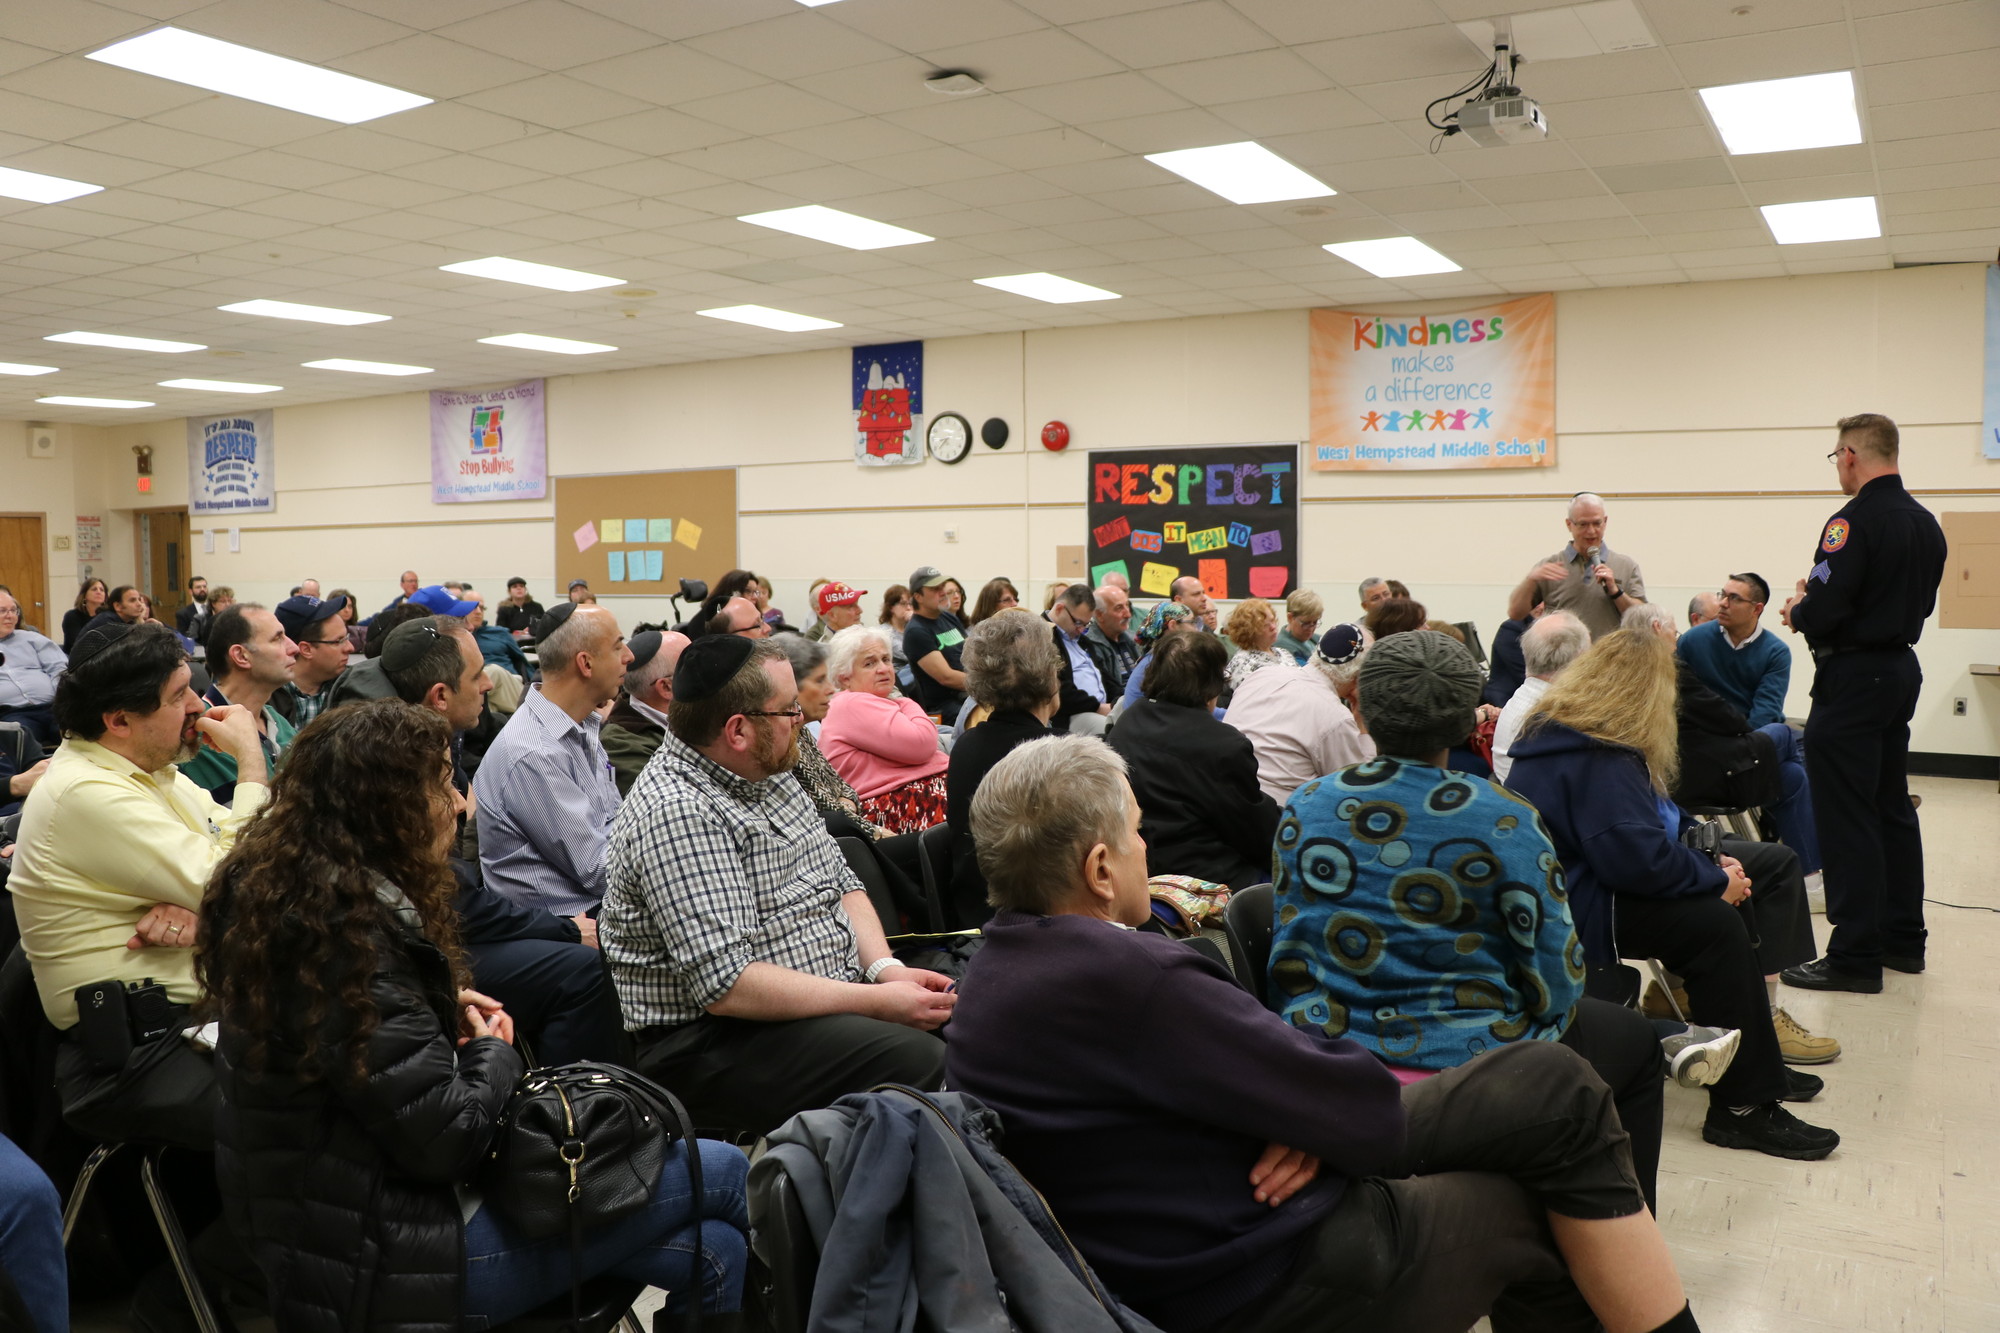 The W. H. Community Support Association arranged the meeting, attended by over 200 residents, police and politicians.